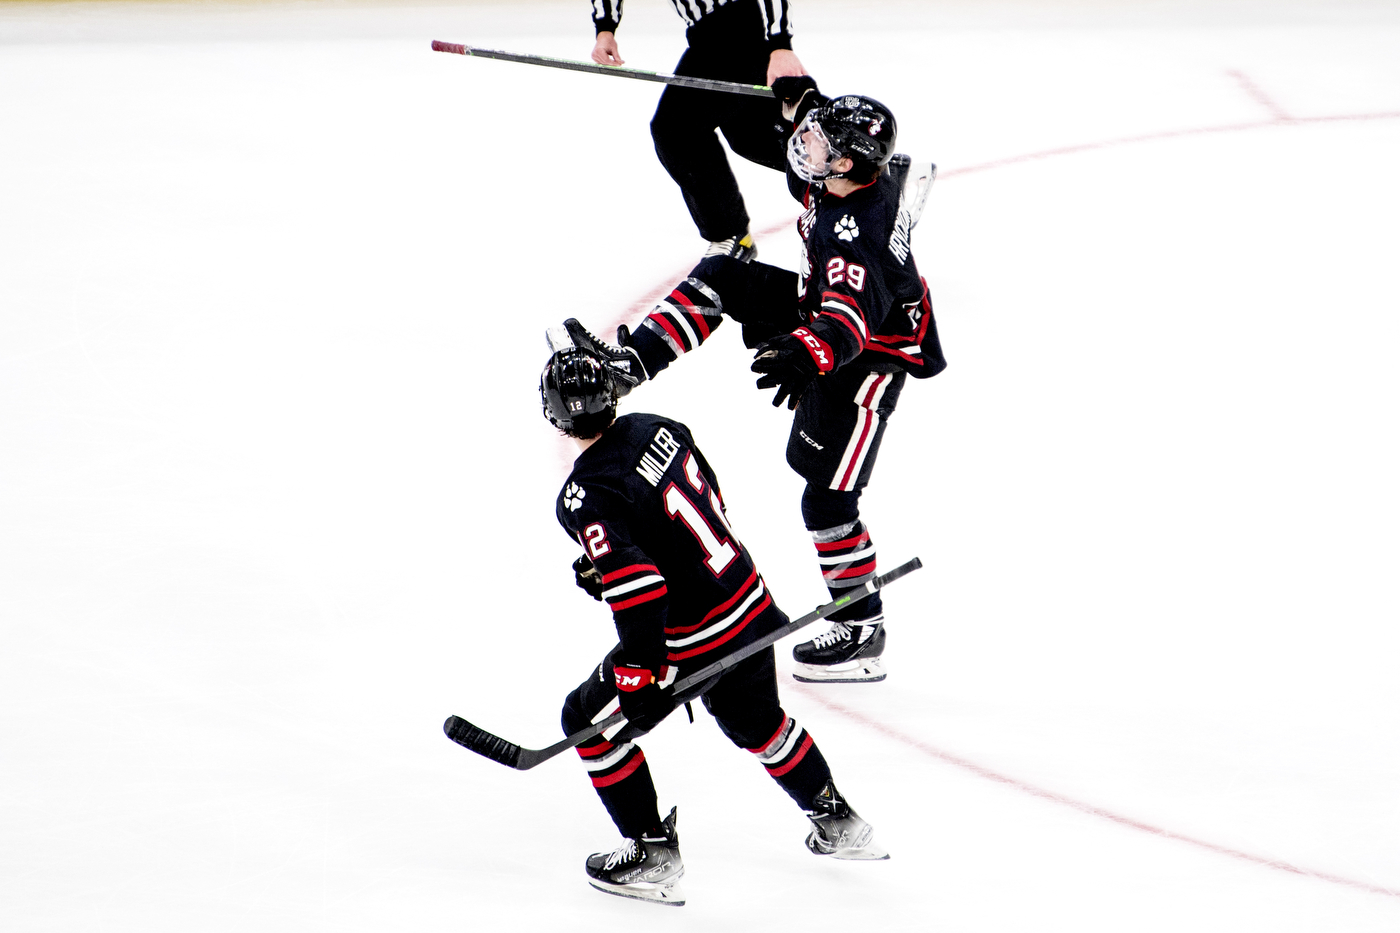 Justin Hryckowian (29) celebrates the clinching goal with 14 seconds left.